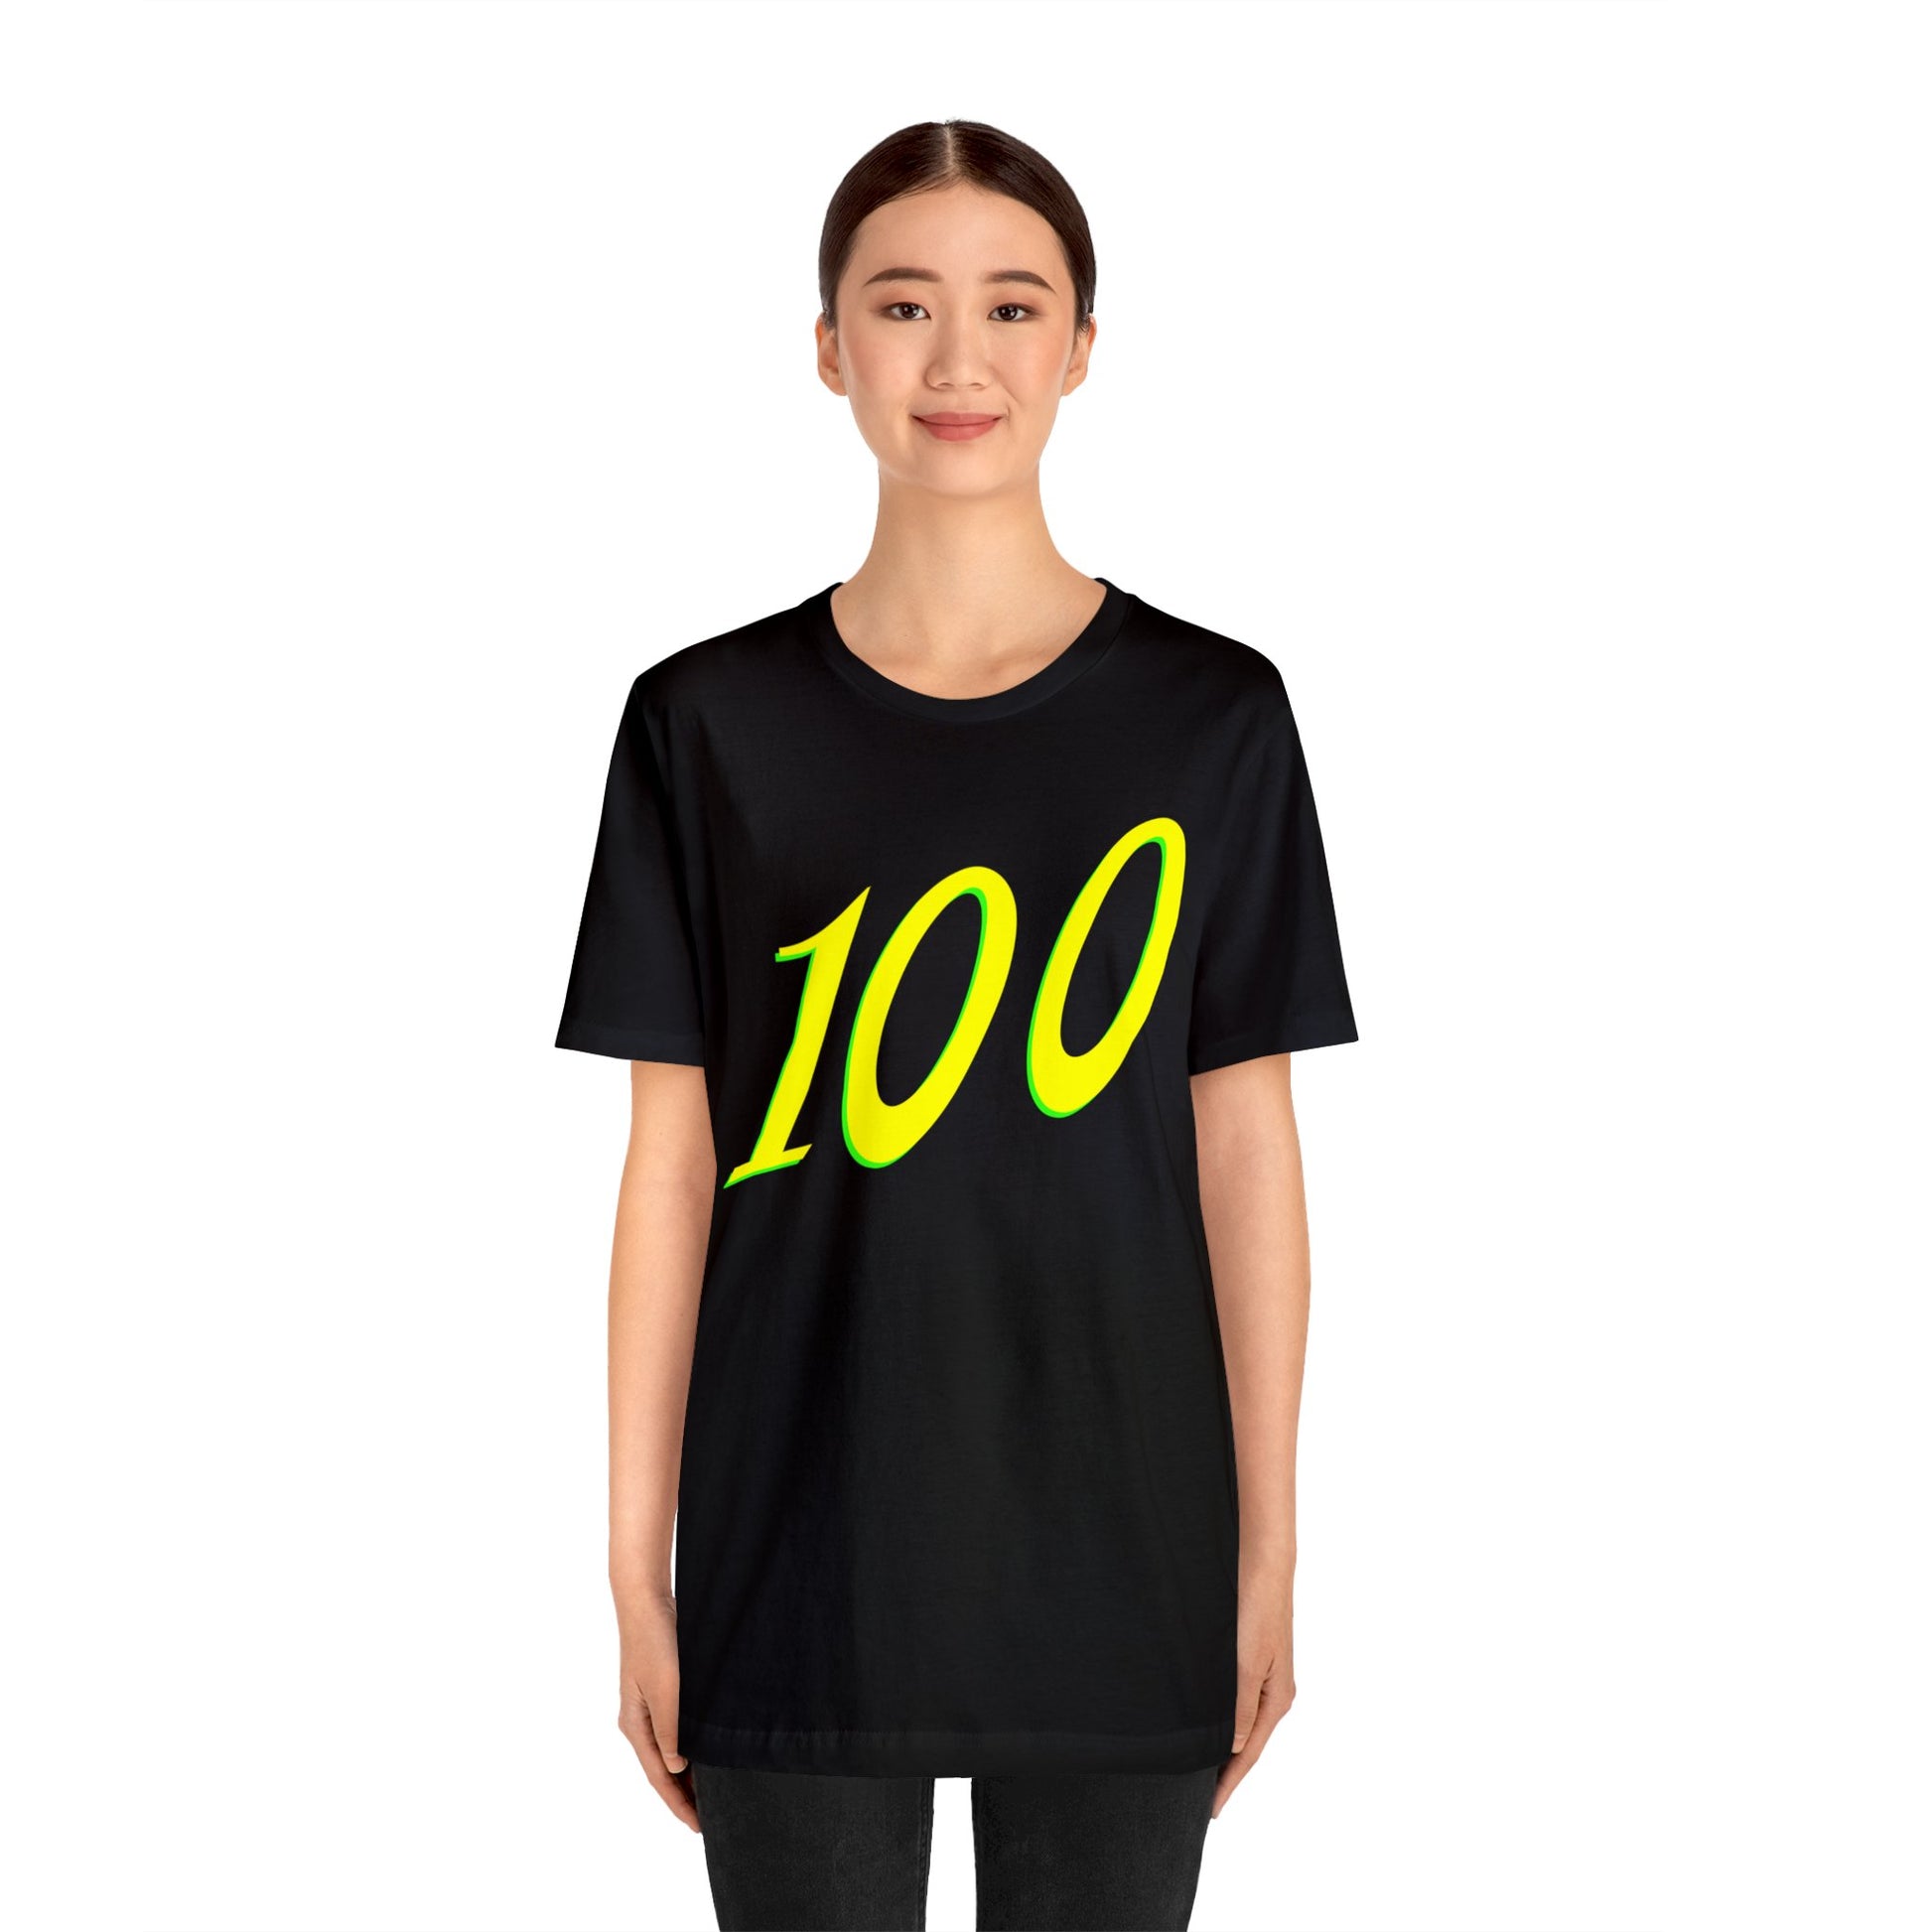 Number 100 Design - Soft Cotton Tee for birthdays and celebrations, Gift for friends and family, Multiple Options by clothezy.com in Asphalt Size Medium - Buy Now